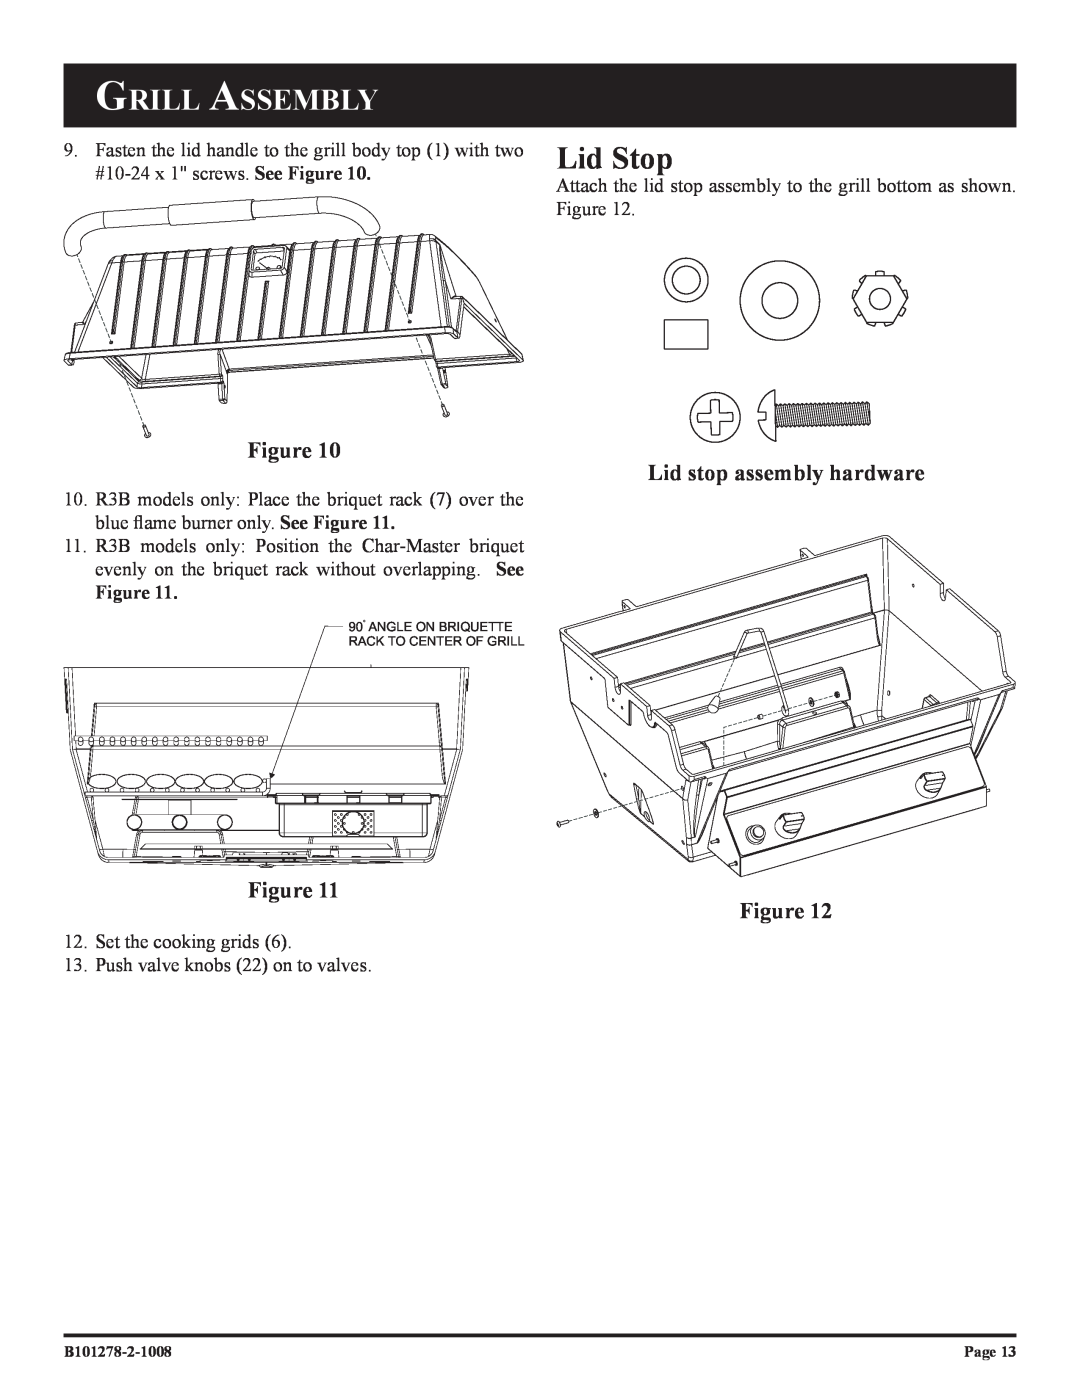 Broilmaster R3-1, R3N-1, R3BN-1, R3B-1 owner manual Lid Stop, Grill Assembly, Lid stop assembly hardware 